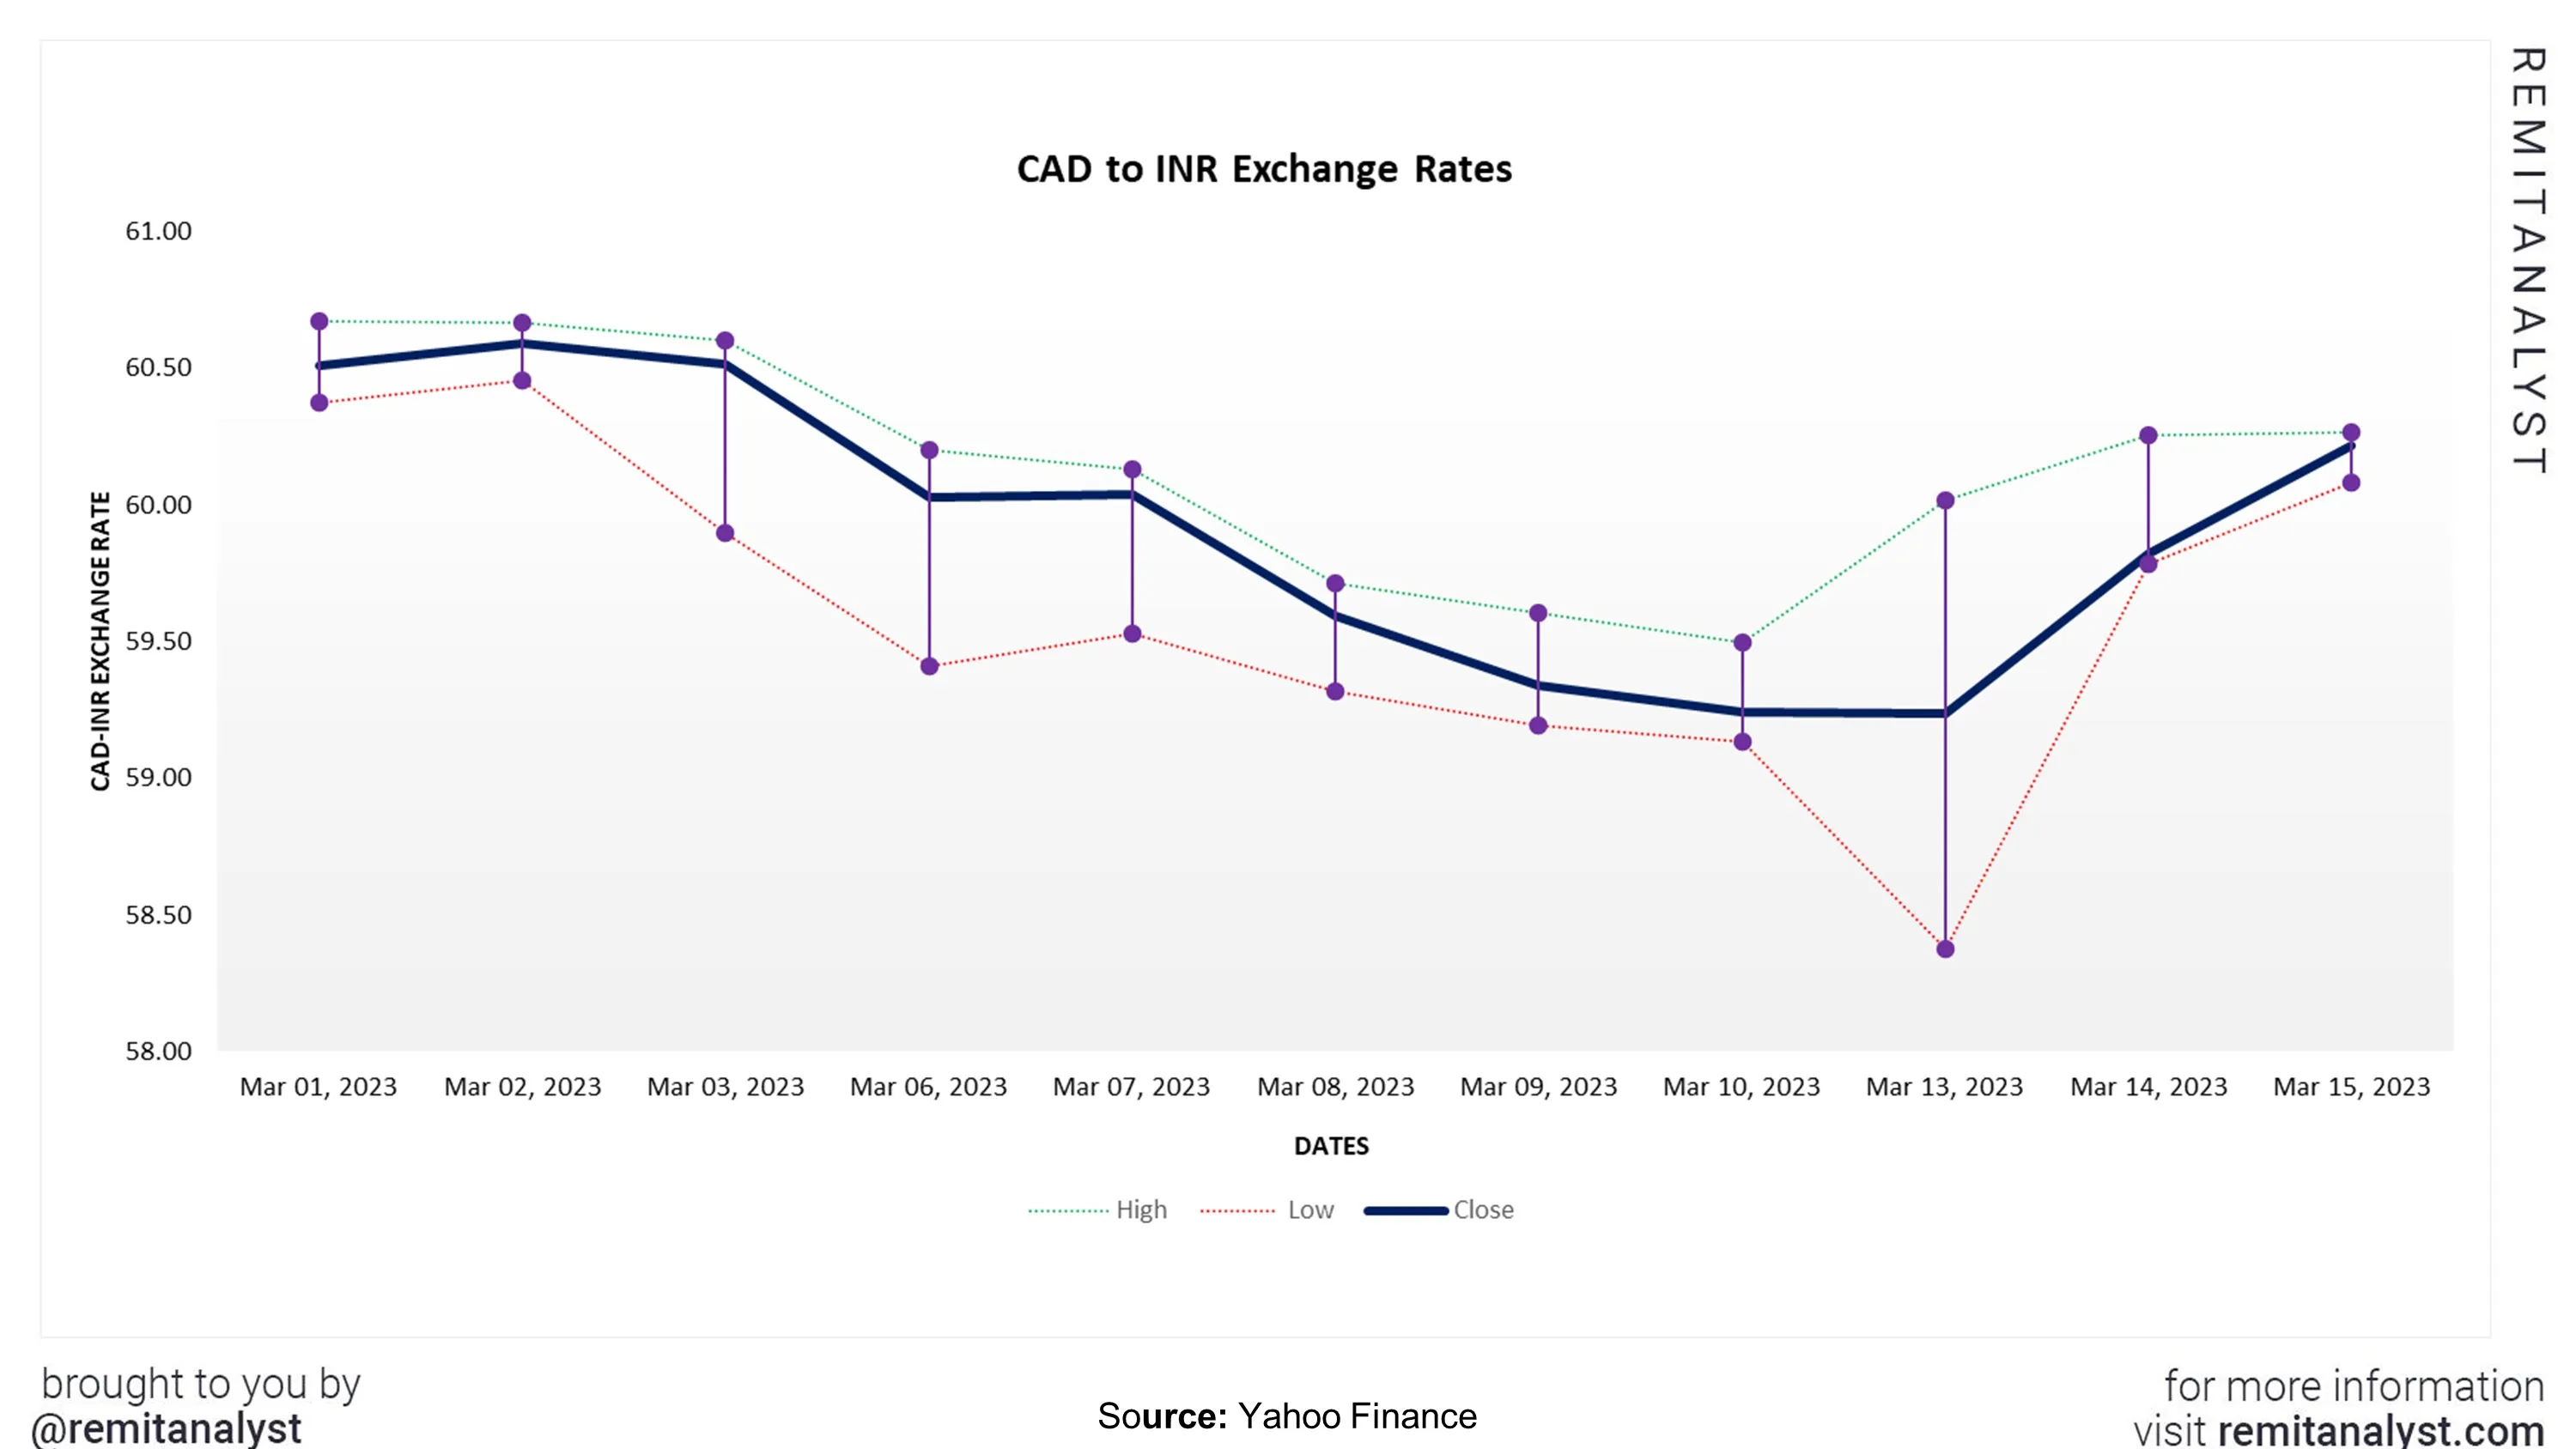 cad-to-inr-exchange-rate-from-1-mar-2023-to-15-mar-2023